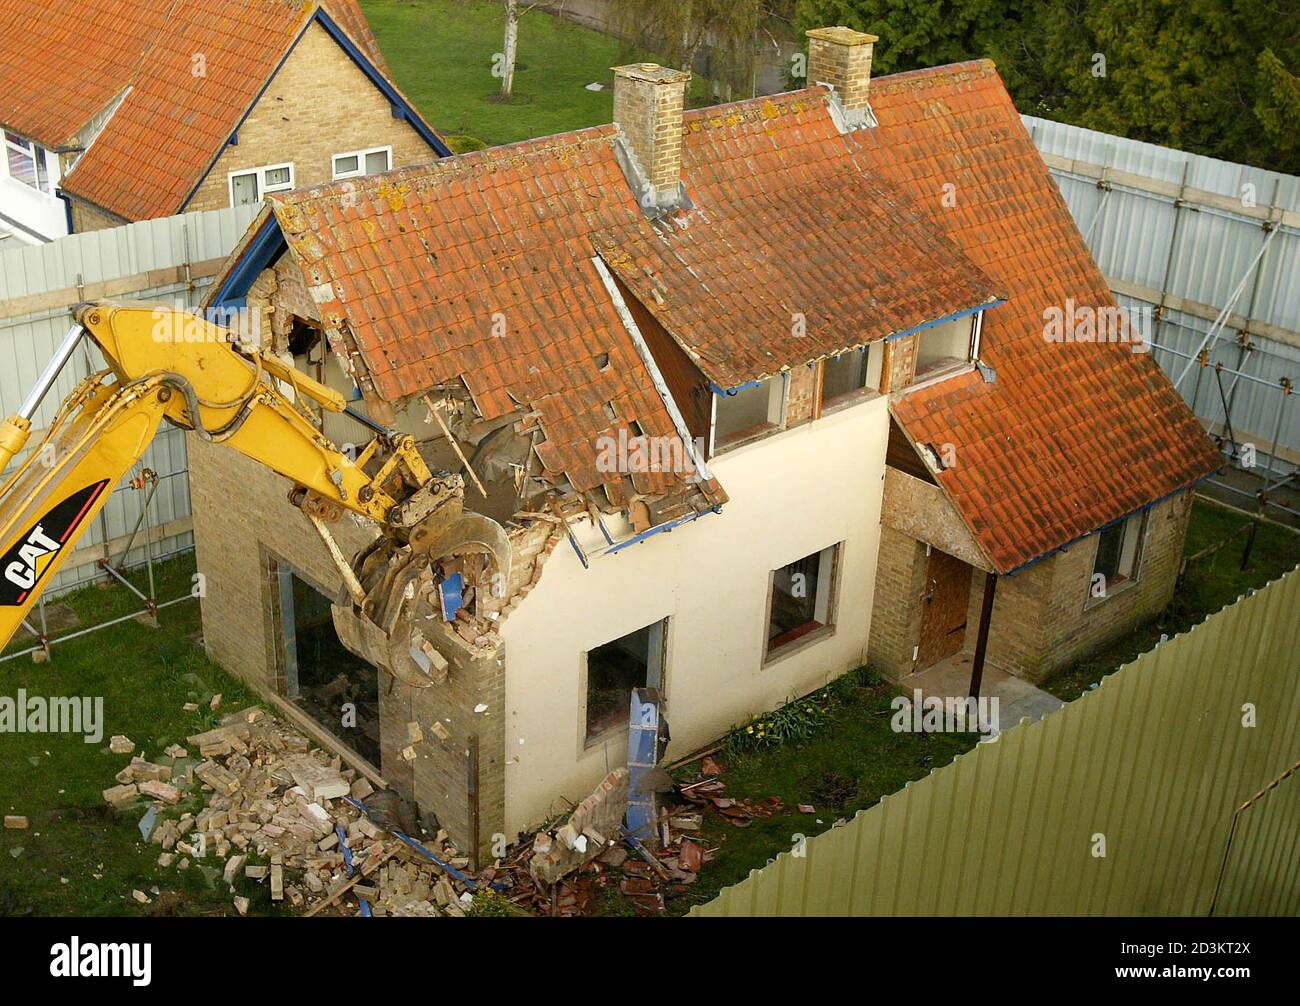 The house where British murderer Ian Huntley who killed 10-year-old Soham school girls Holly Wells and Jessica Chapman is demolished in Soham, Cambridgeshire, eastern England, April 3, 2004. Cambridgeshire council condemned the property fearing it would be a permanent reminder of the grisly deaths, which have haunted the local community. Huntley murdered the girls in August 2002 after luring them into the house that came with his job as caretaker at Soham Village College, which was on the same site as their primary school. REUTERS/Peter Macdiarmid  PKM/JD Stock Photo